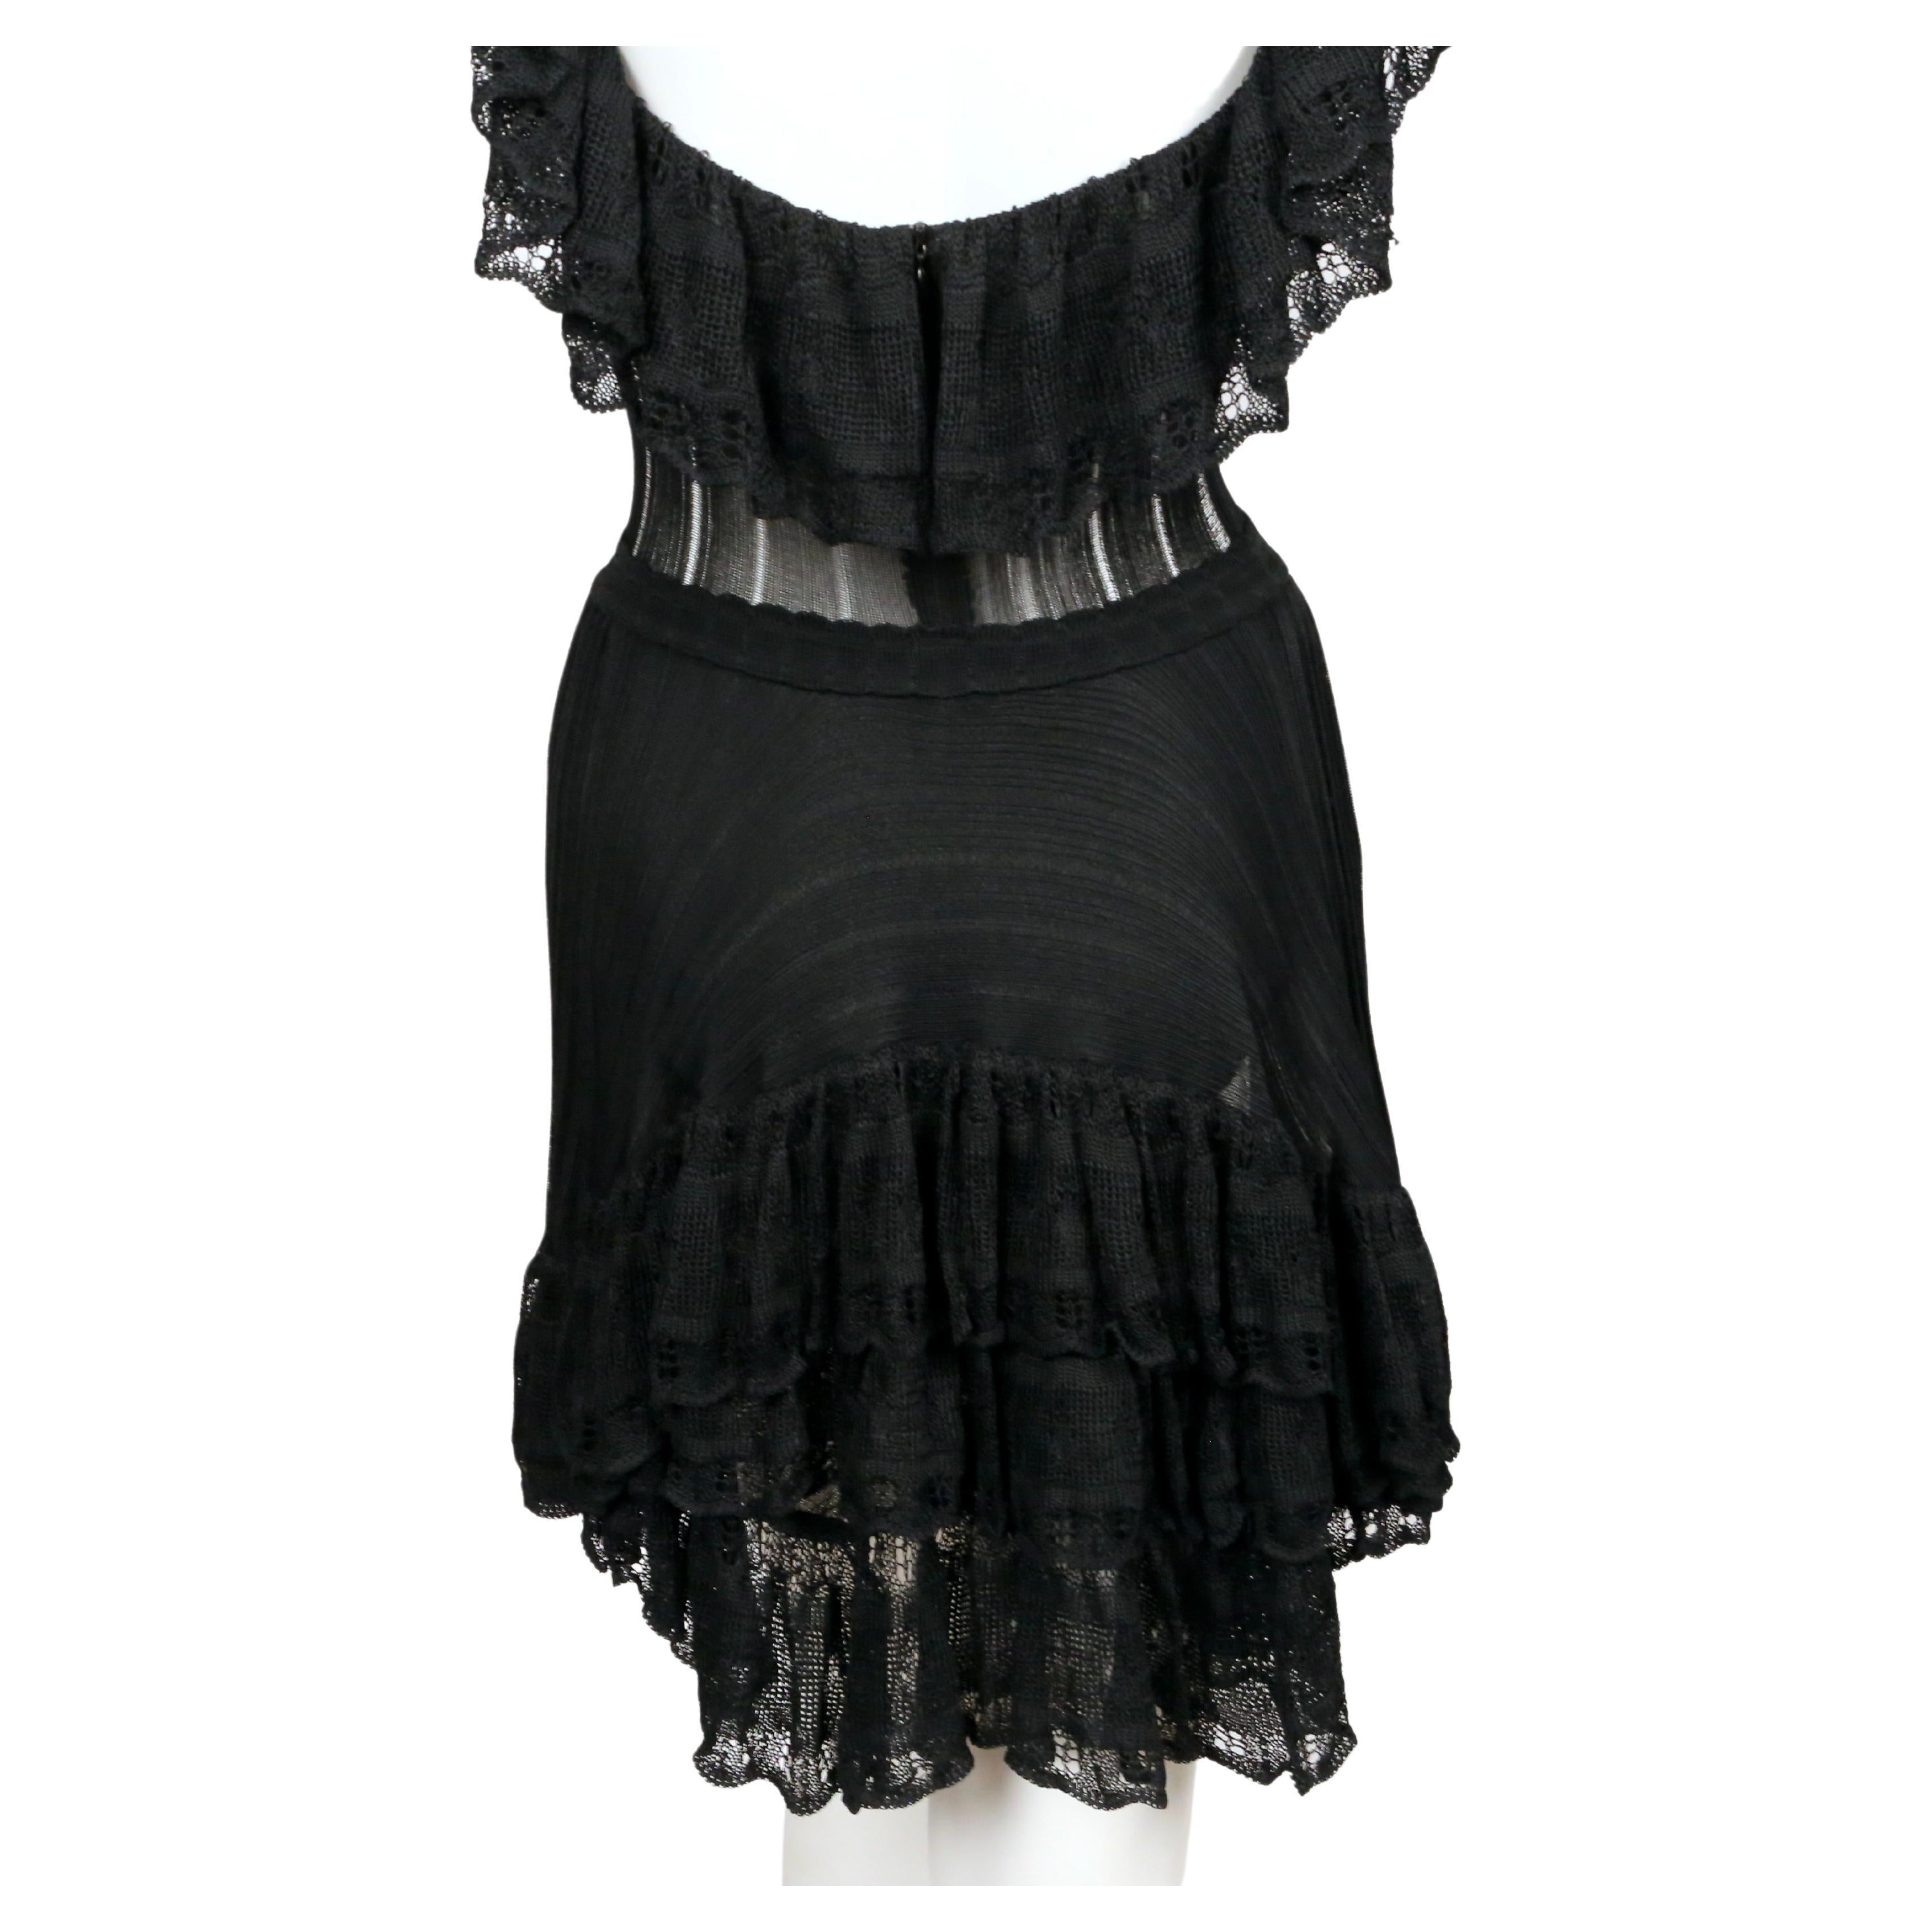  1992 AZZEDINE ALAIA black lace RUNWAY dress with bustle For Sale 7